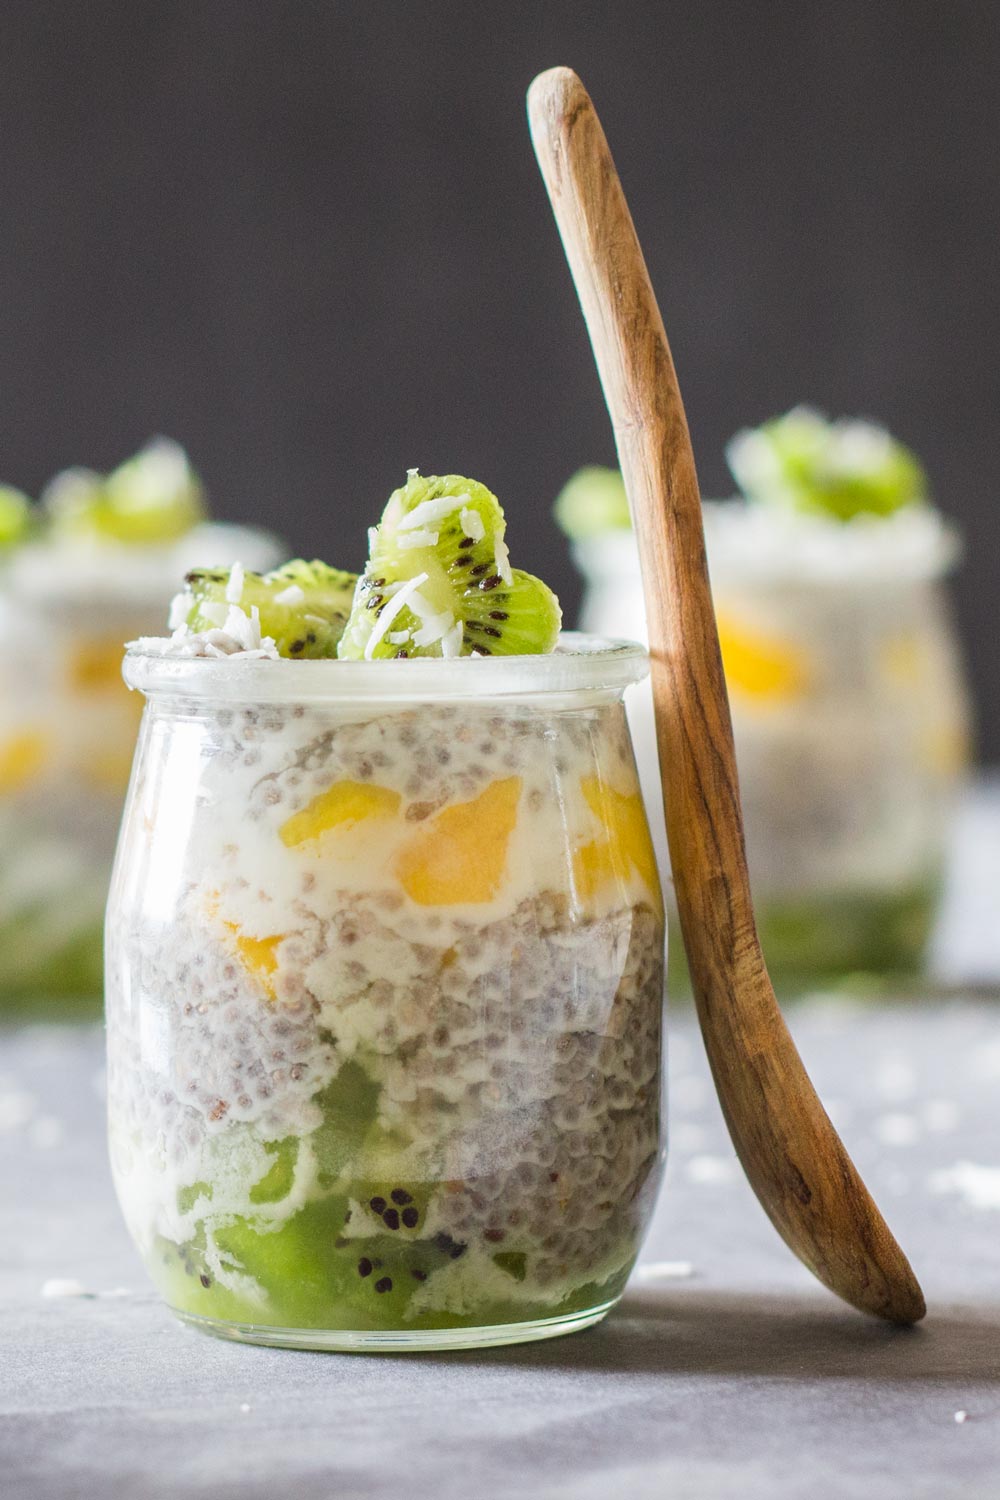 Tropical Chia Pudding | Green Healthy Cooking | 20 Swoon Worthy Chia Pudding Recipes | Gluten Free, Vegan, and Paleo options